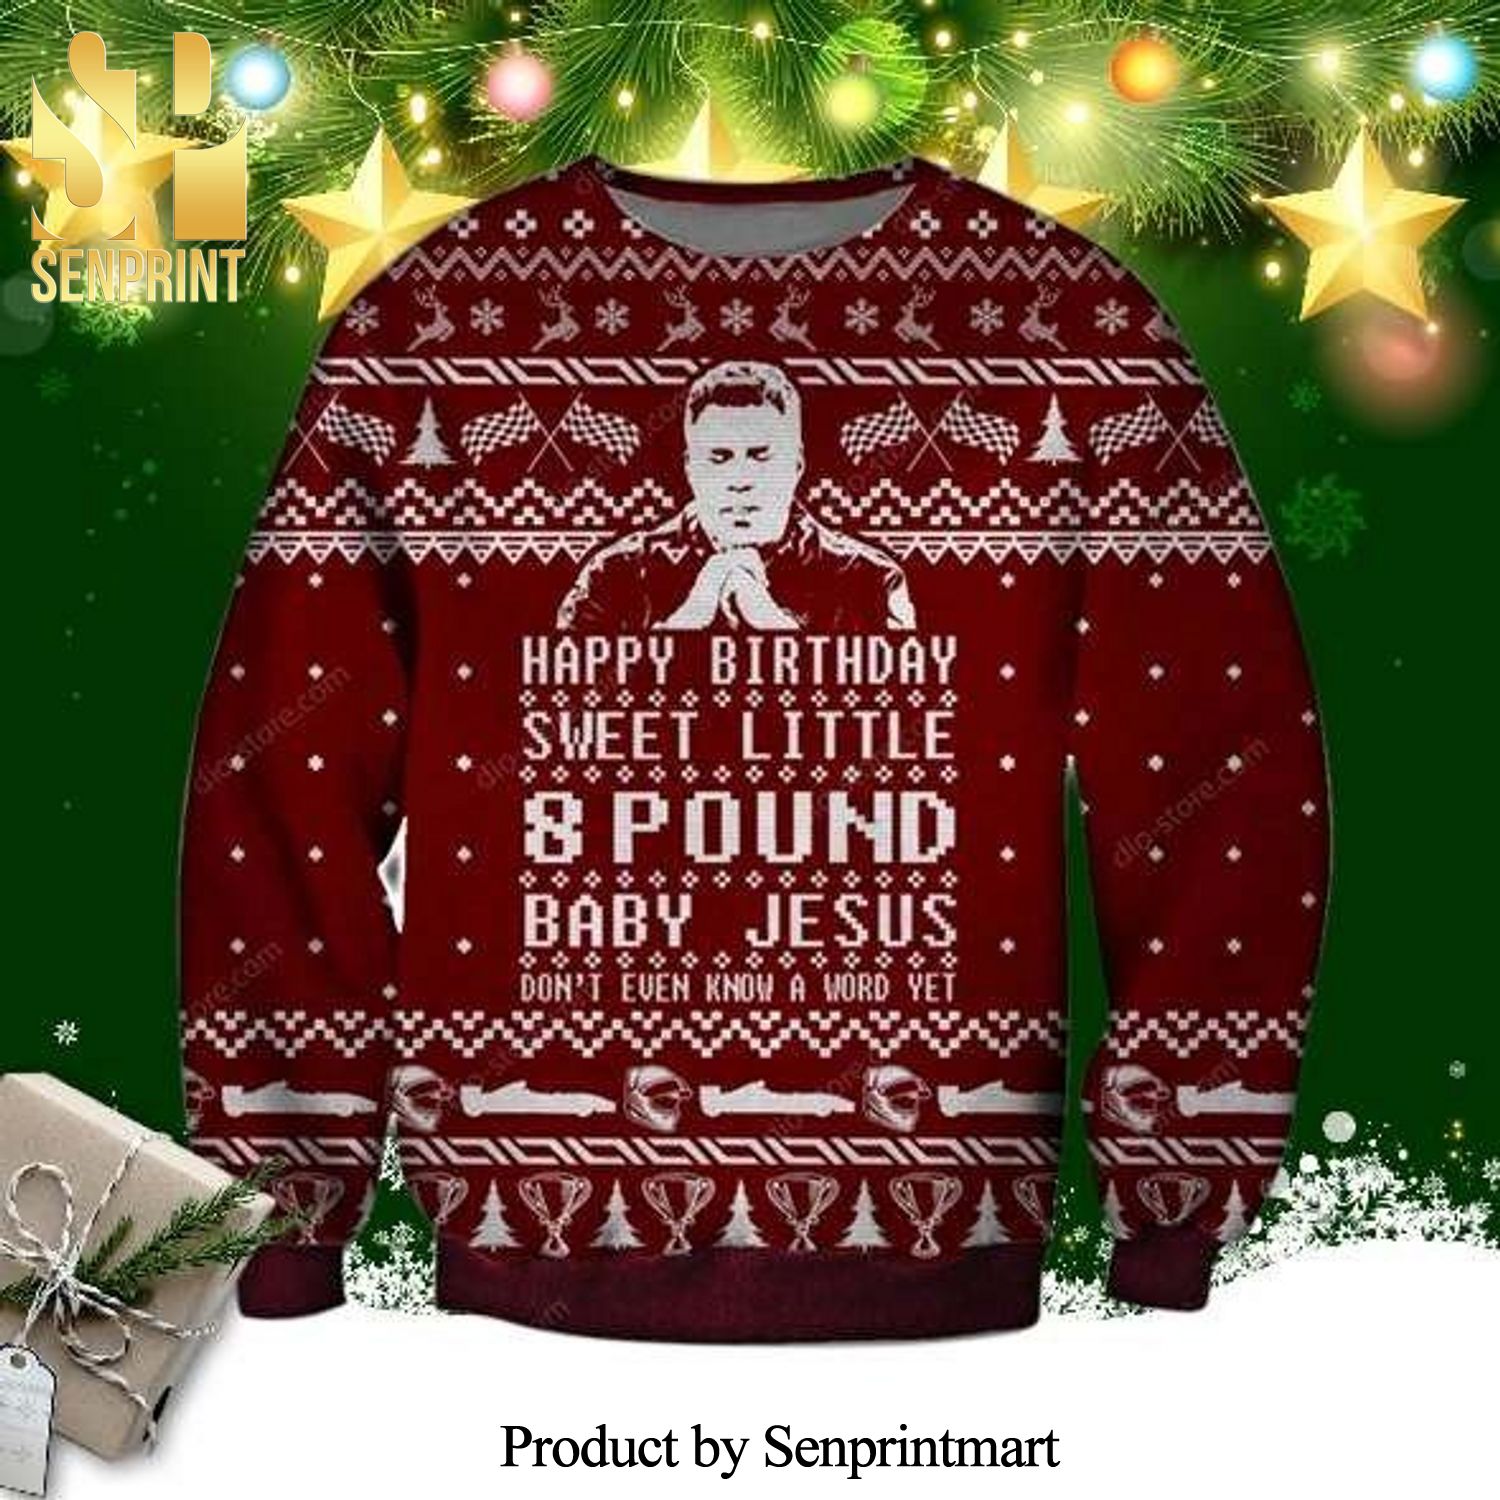 Talladega Night The Ballad Of Ricky Bobby Happy Birthday Sweet Little Knitted Ugly Christmas Sweater